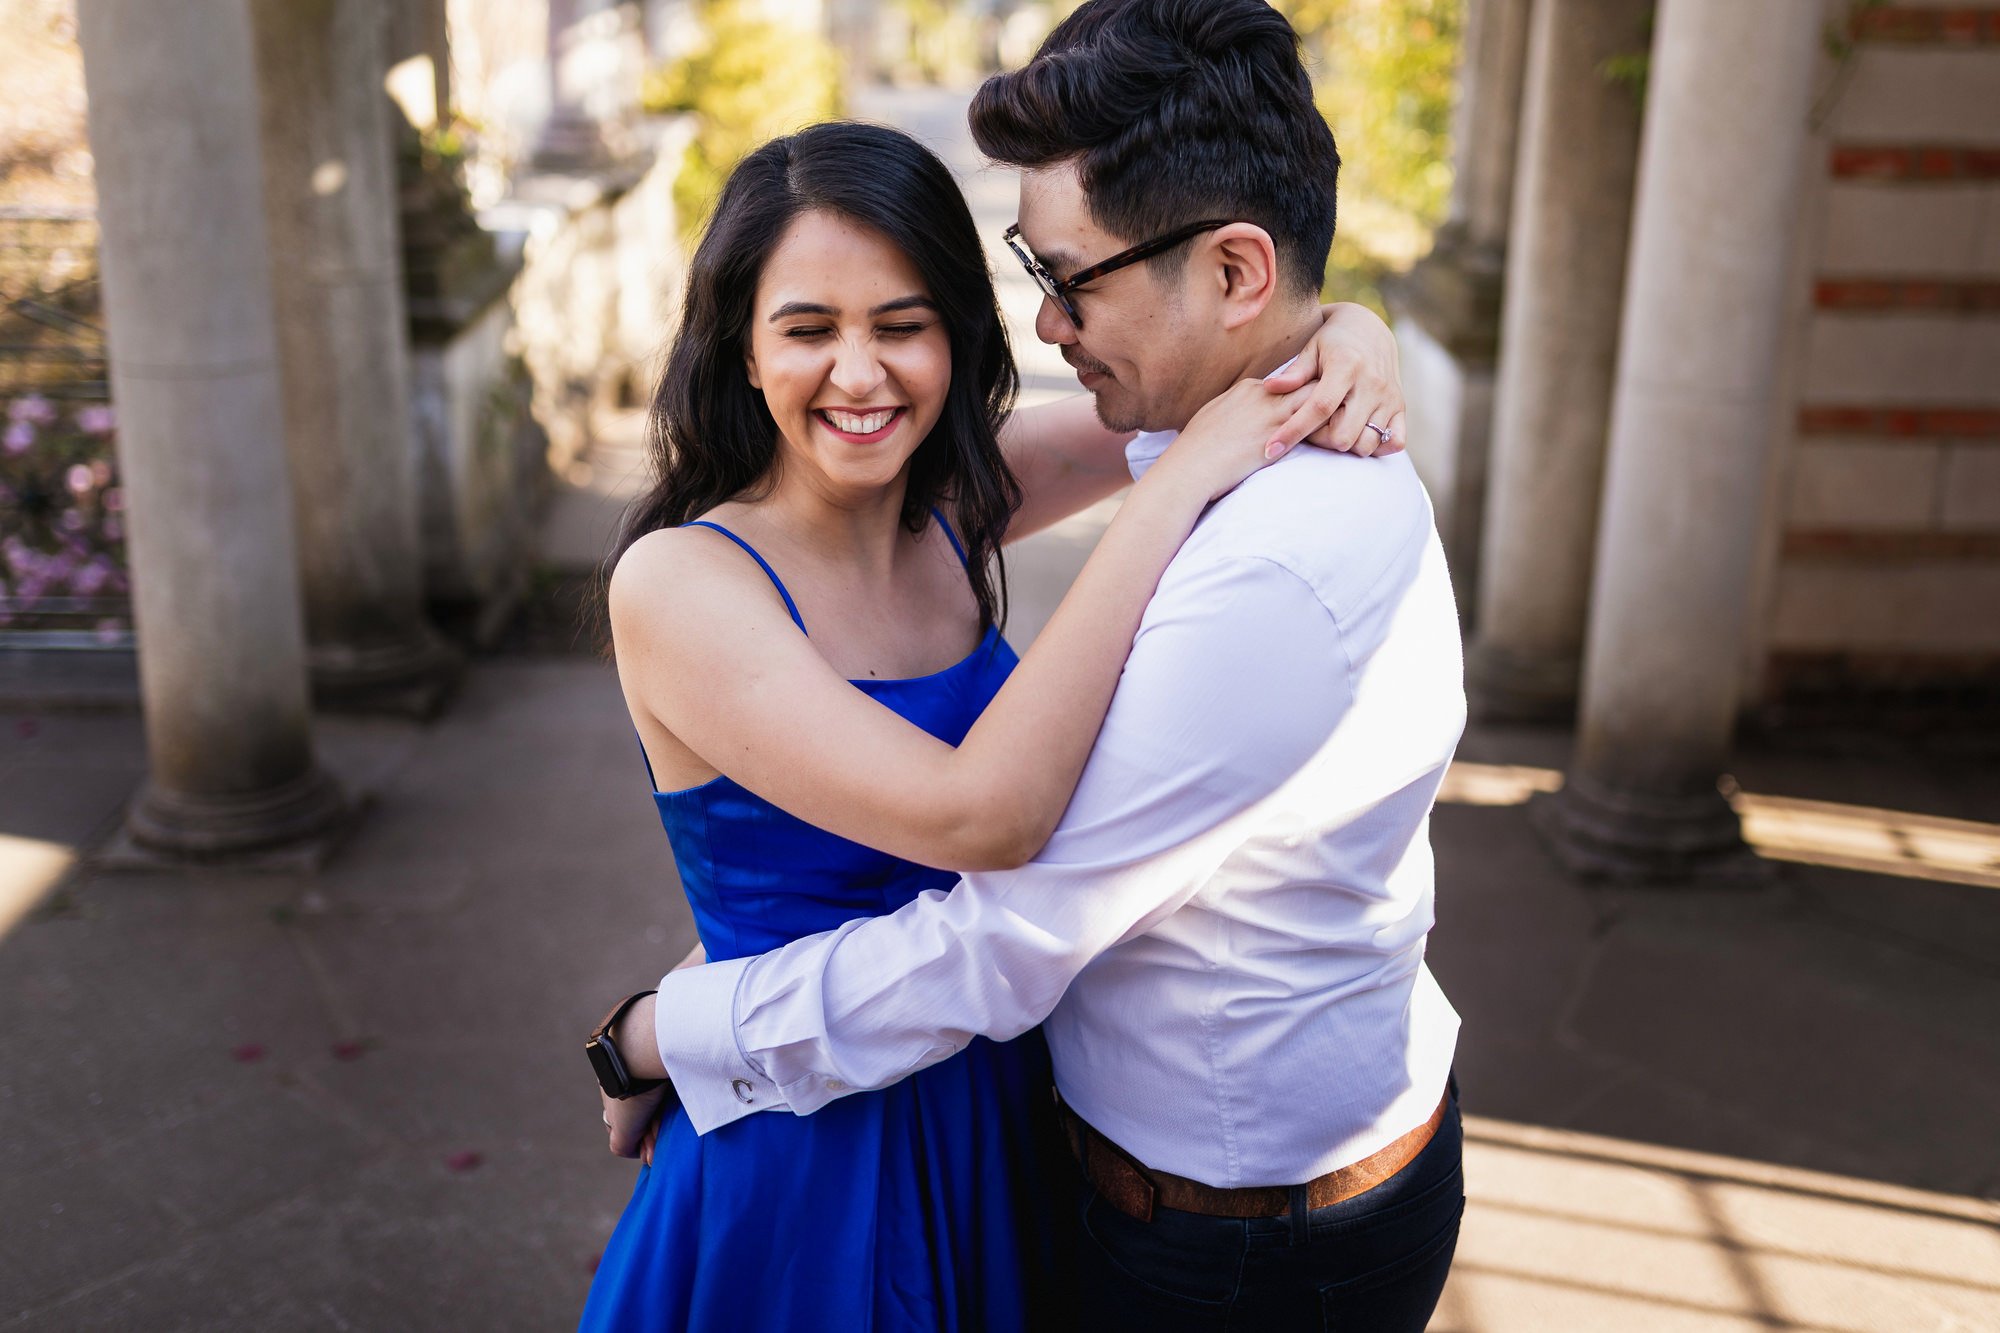 The Hill Garden and Pergola, Hampstead, London, pre-wed shoot, engagement shoot, Natural asian wedding photographer